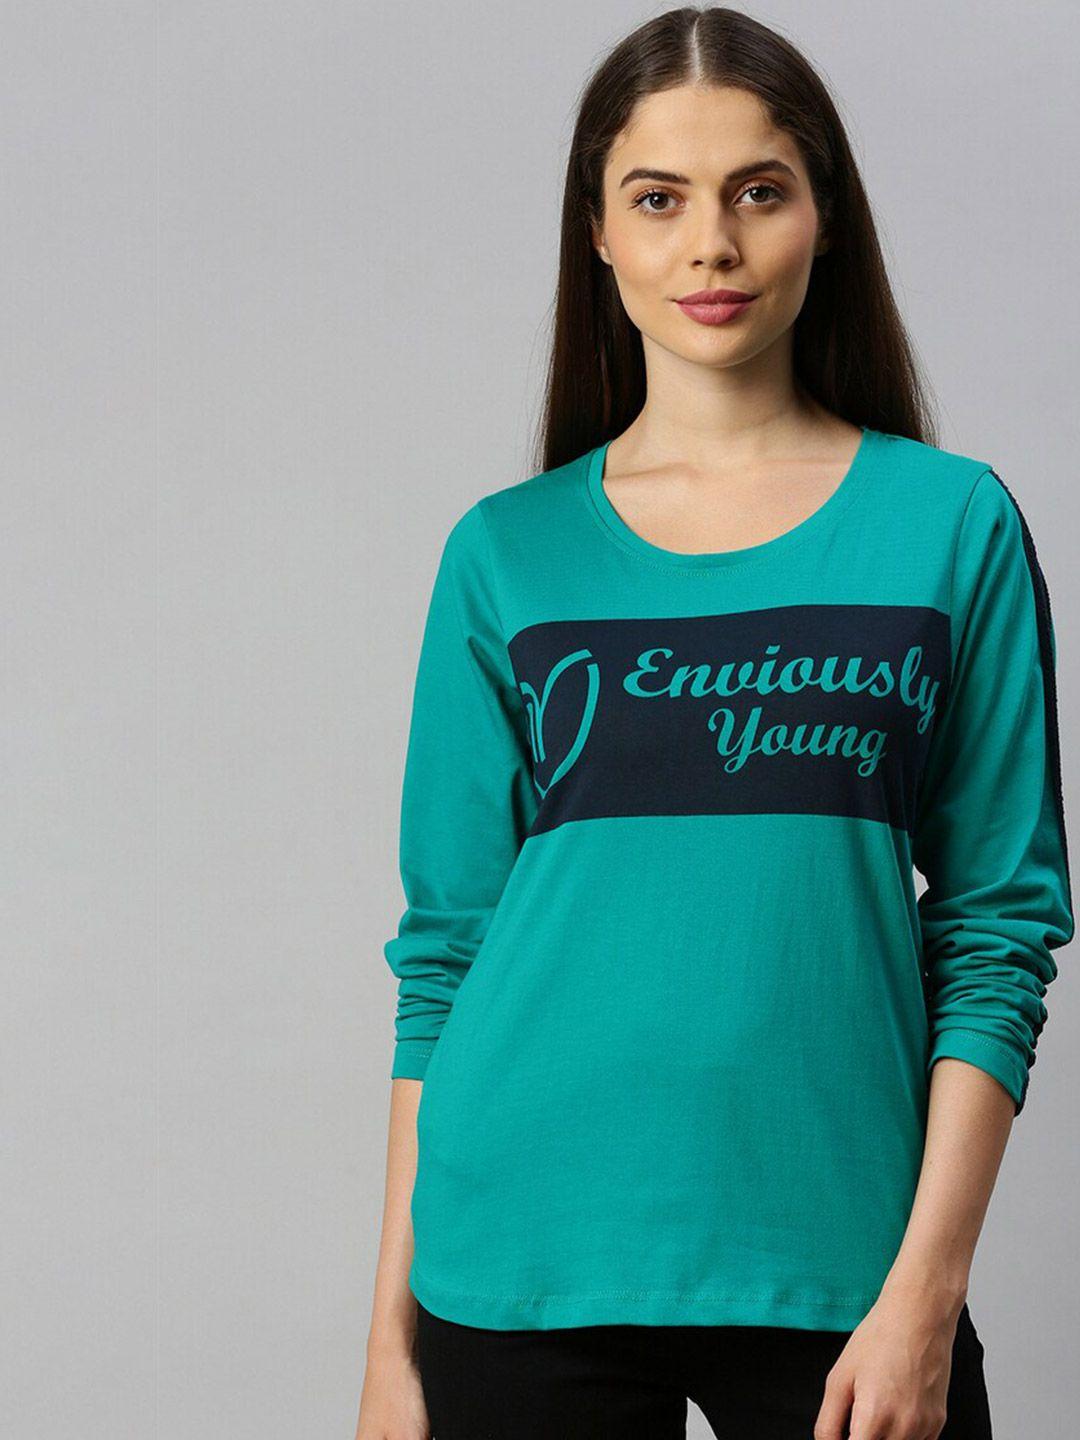 enviously young women teal typography printed applique t-shirt